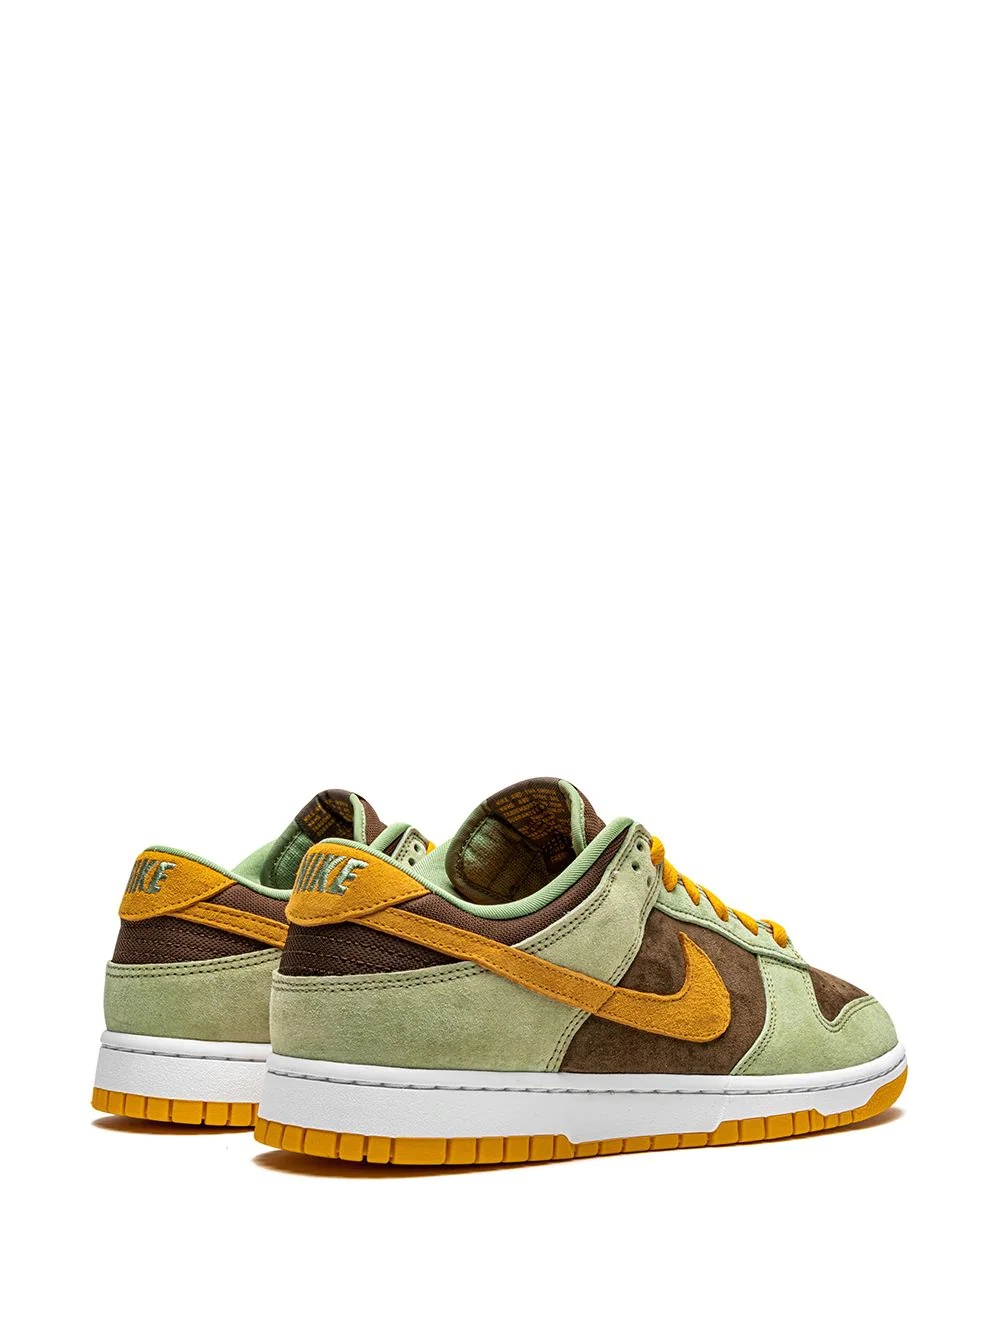 Dunk Low "Dusty Olive" sneakers - 3